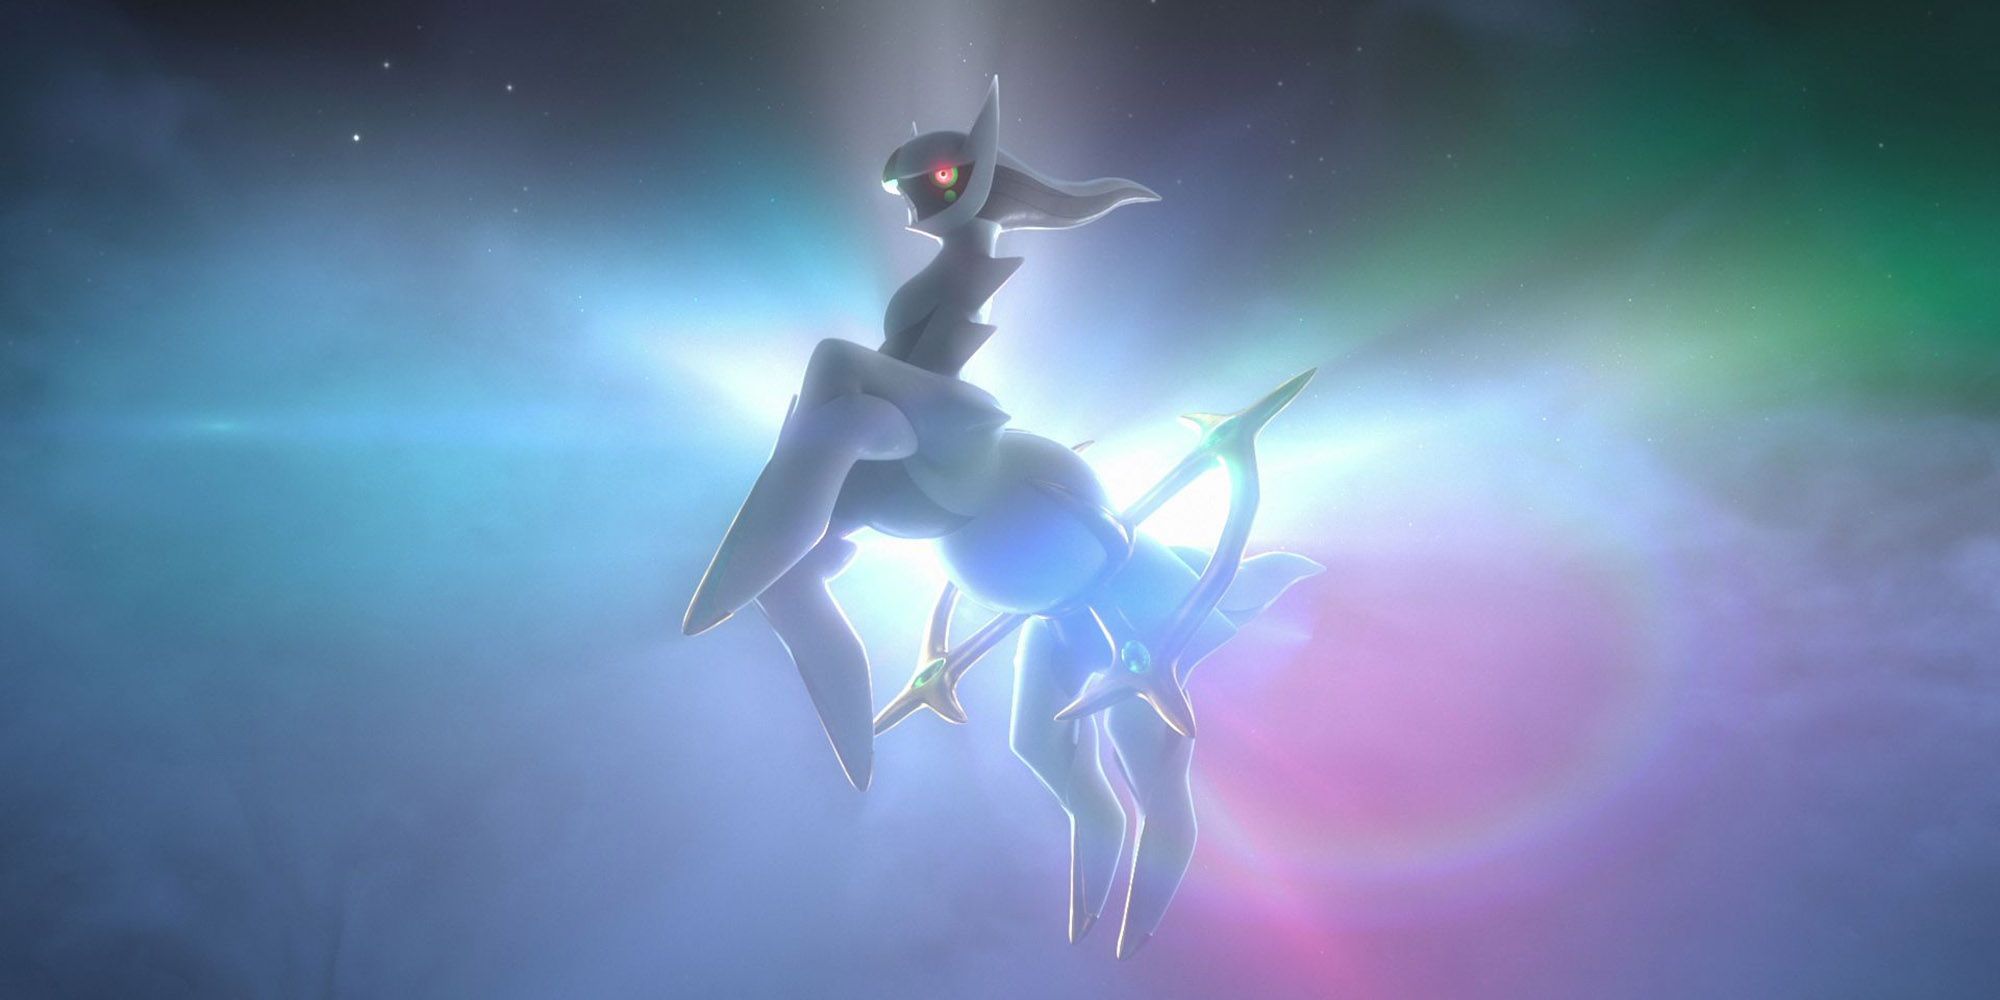 Arceus destroyer and maker of worlds